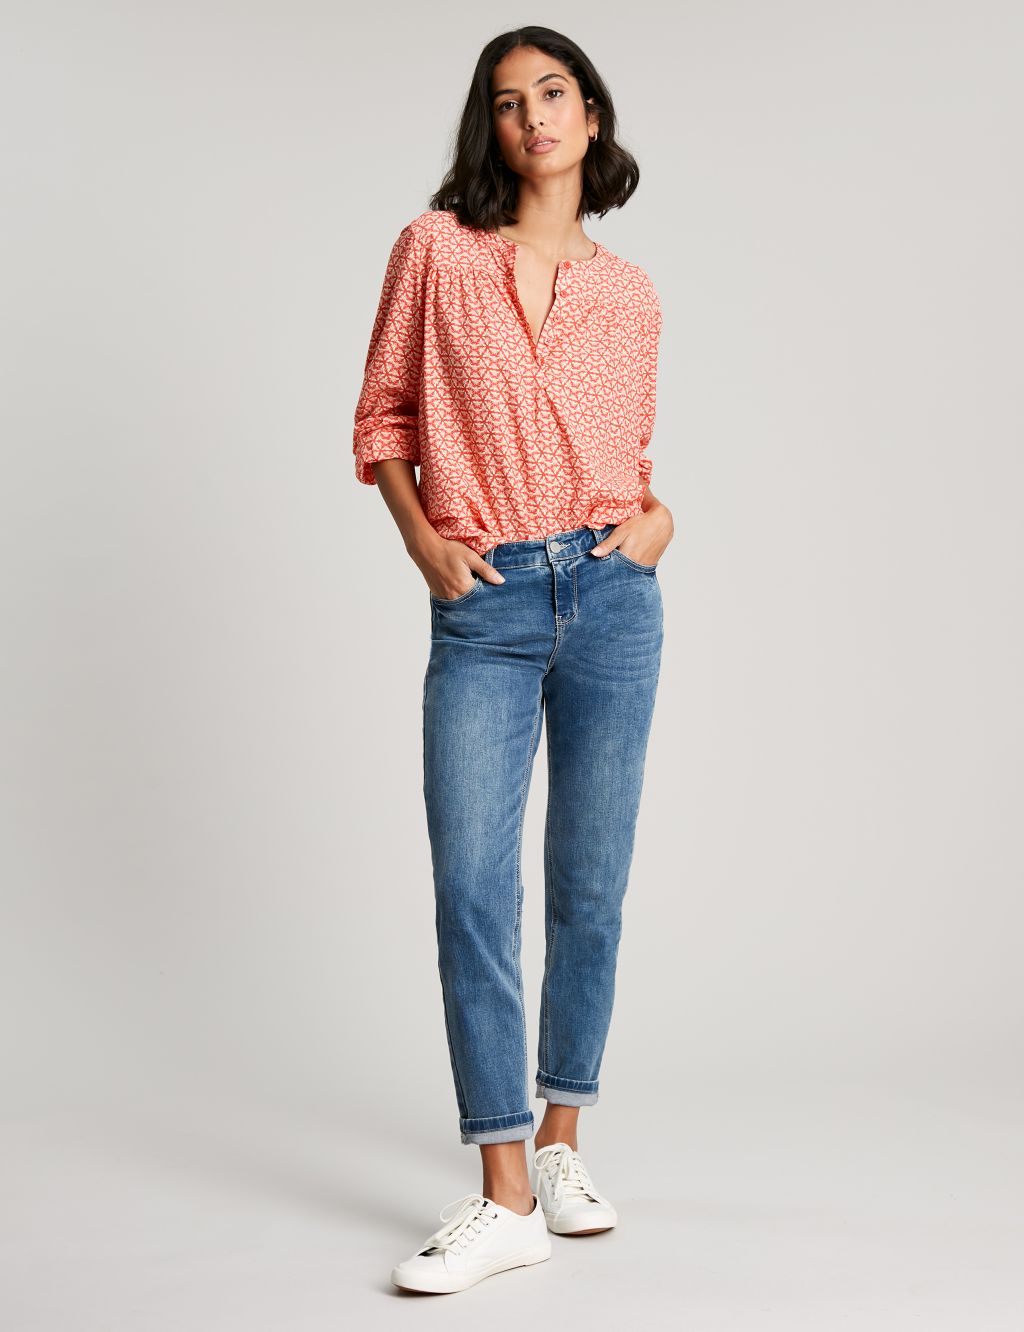 Printed Round Neck Popover Blouse image 1